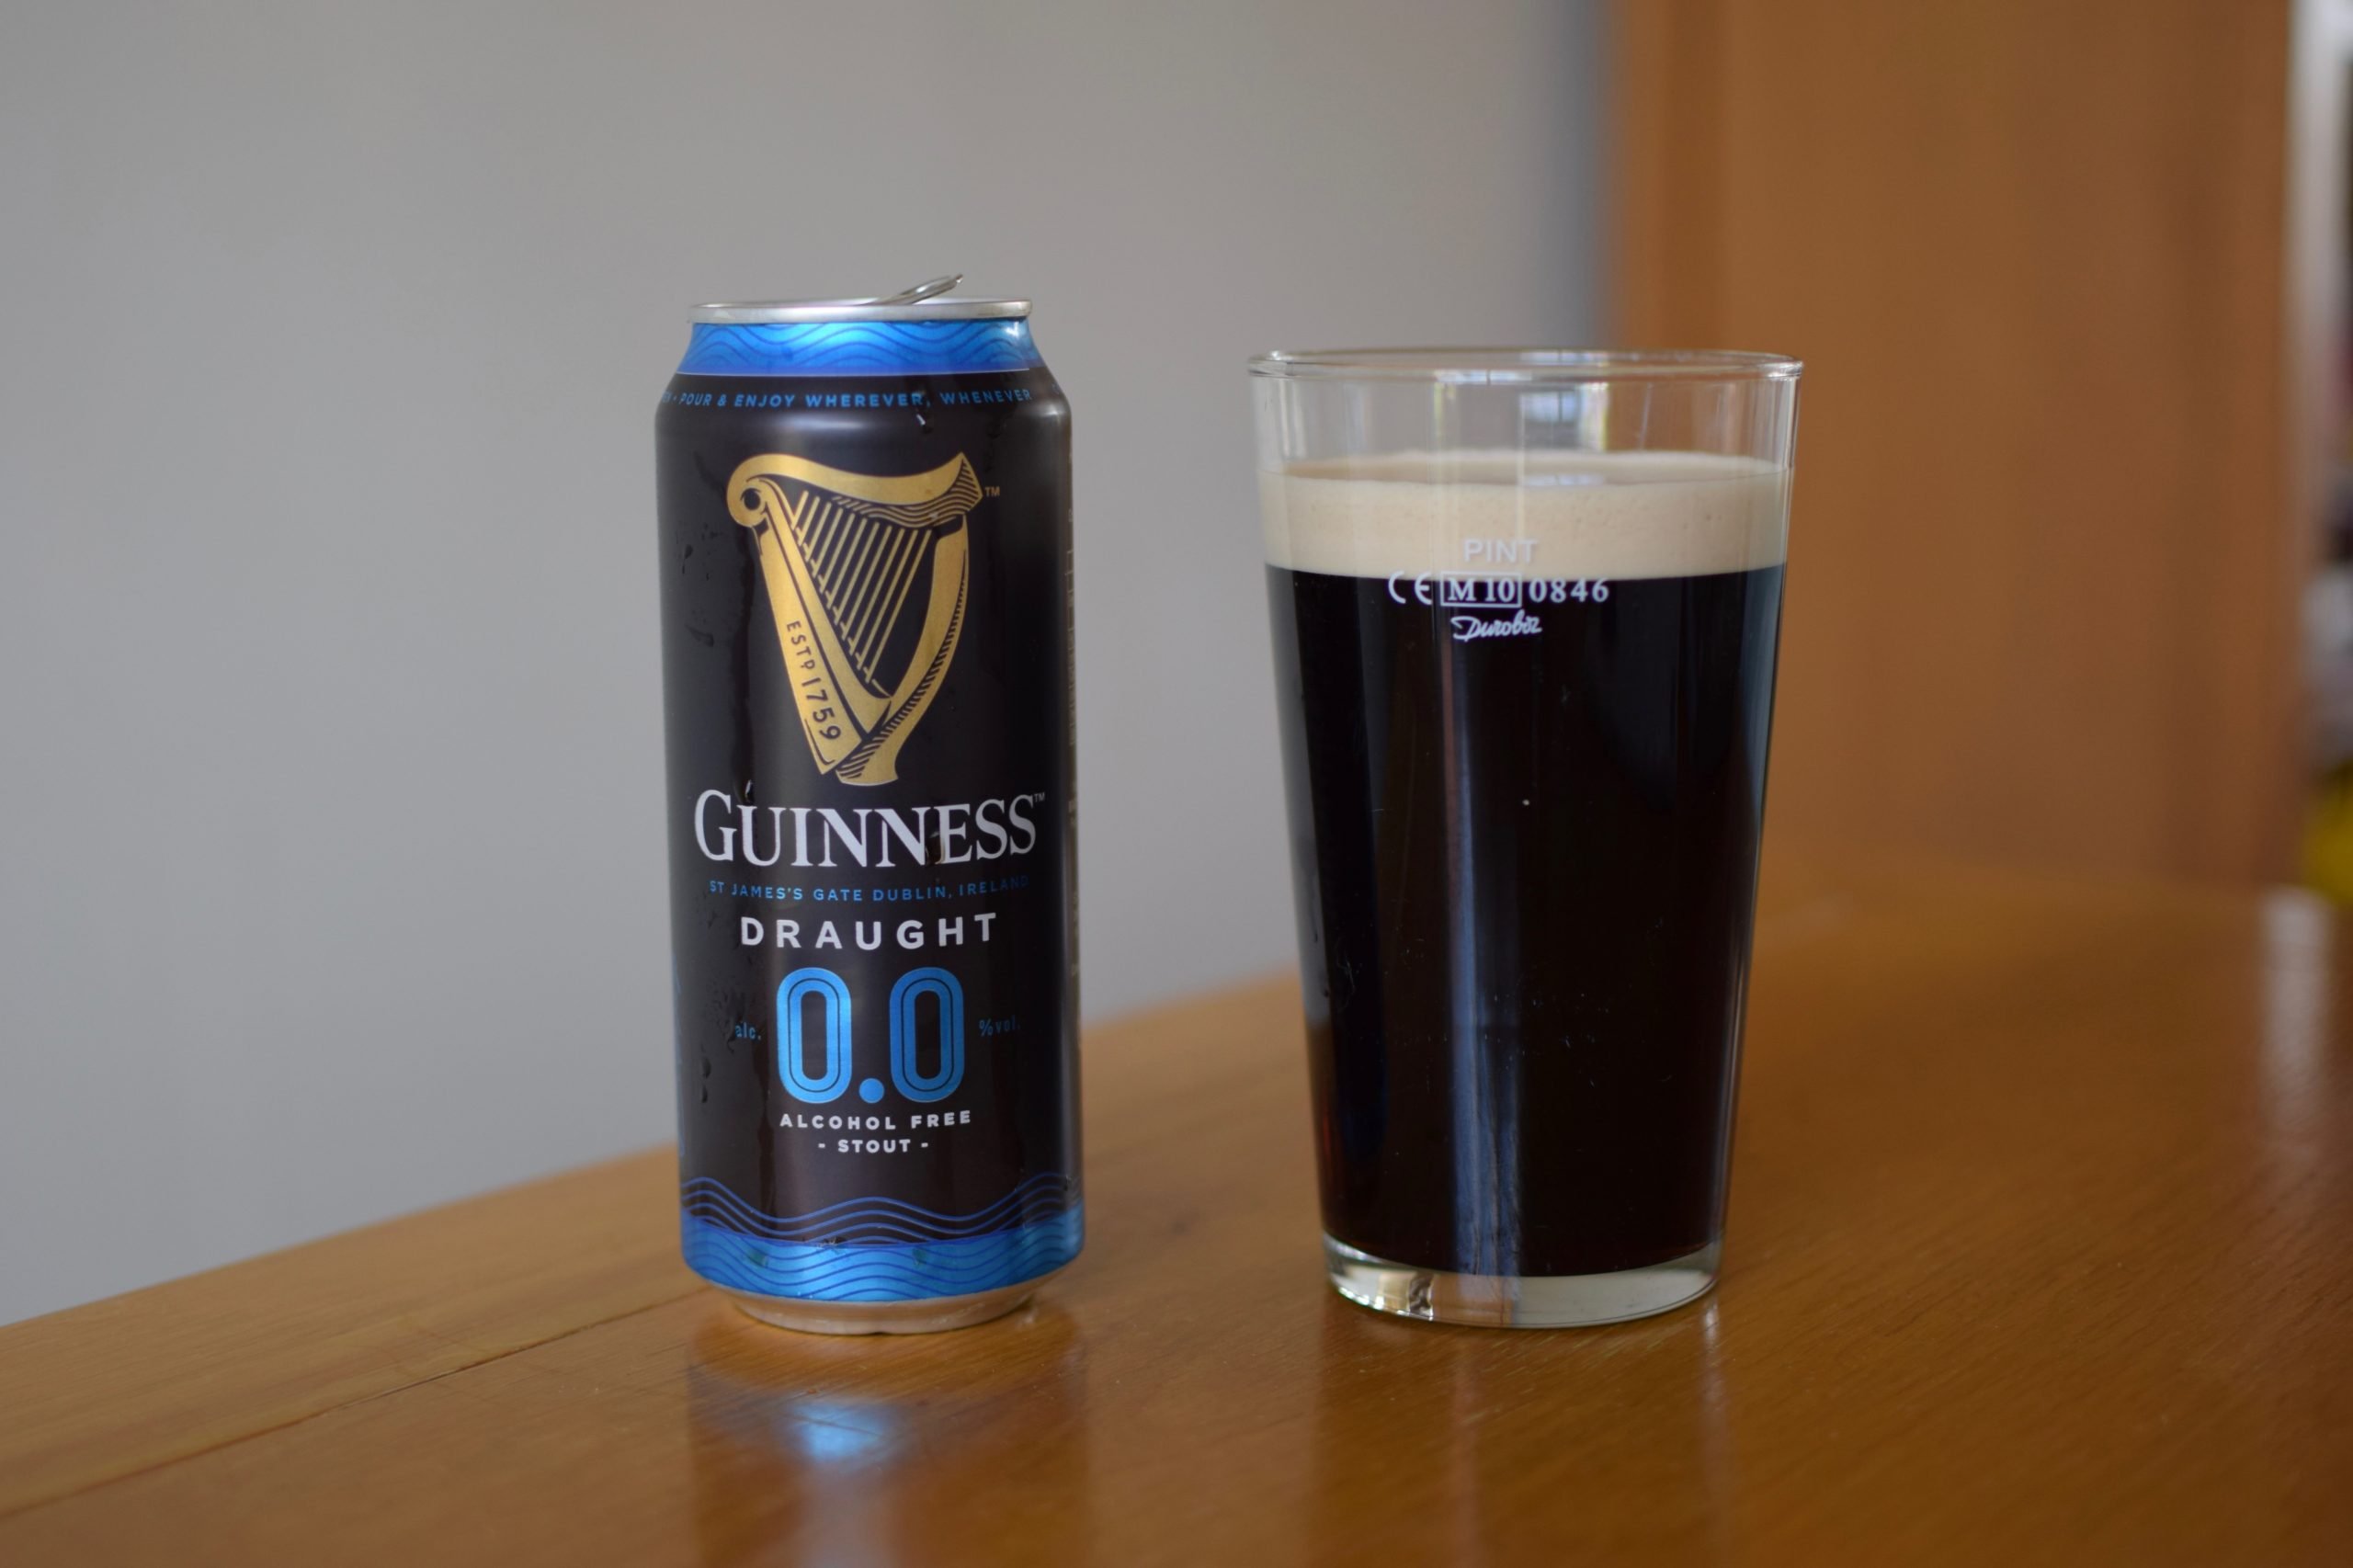 "0.0" by Guinness